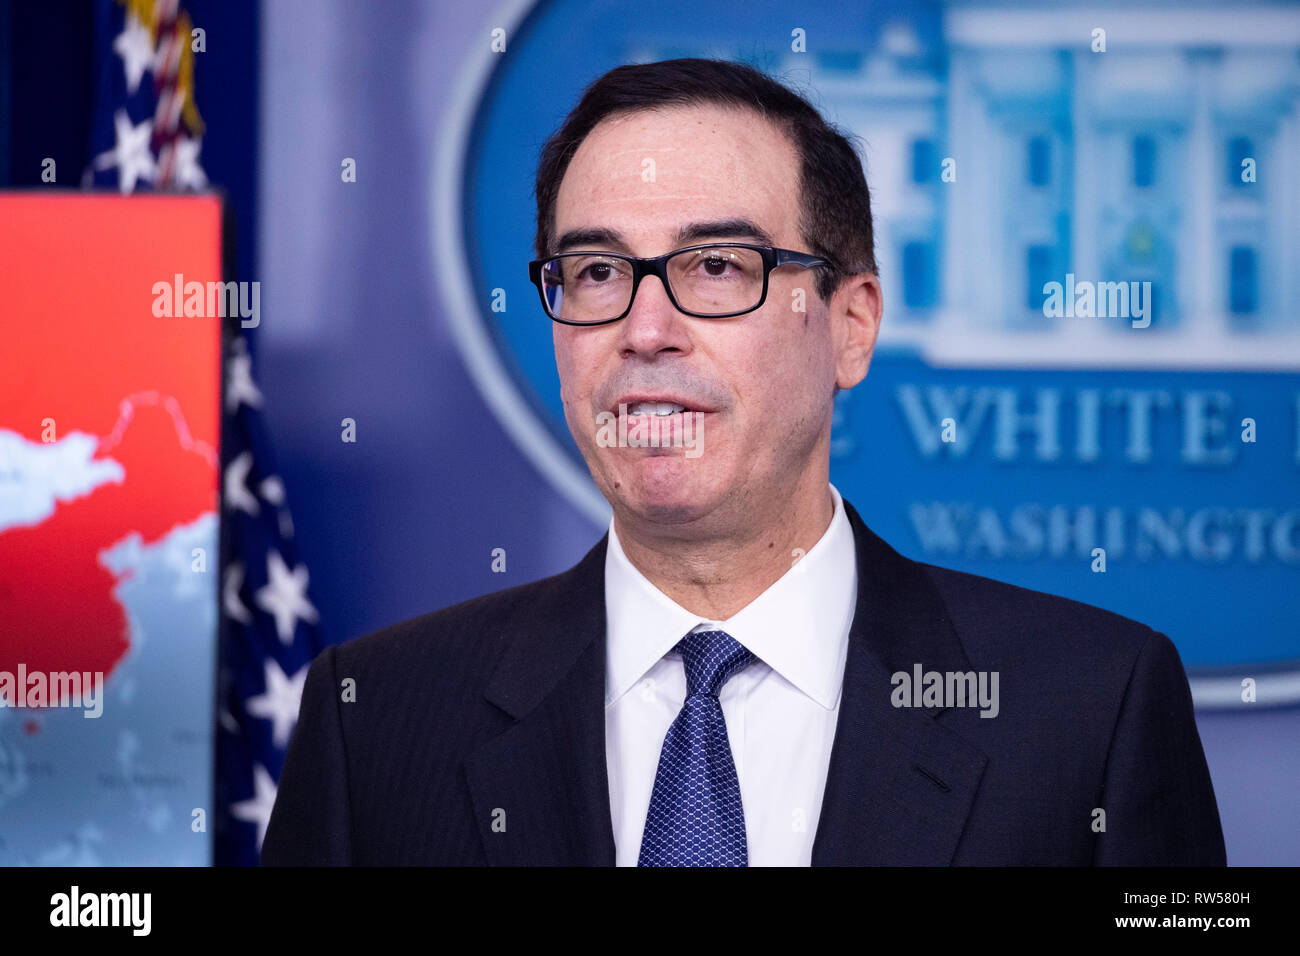 Treasury Secretary Steven Mnuchin takes questions from reporters at the White House in Washington, DC on January 28, 2019. The White House has announced new economic sanctions against Venezuela. Stock Photo